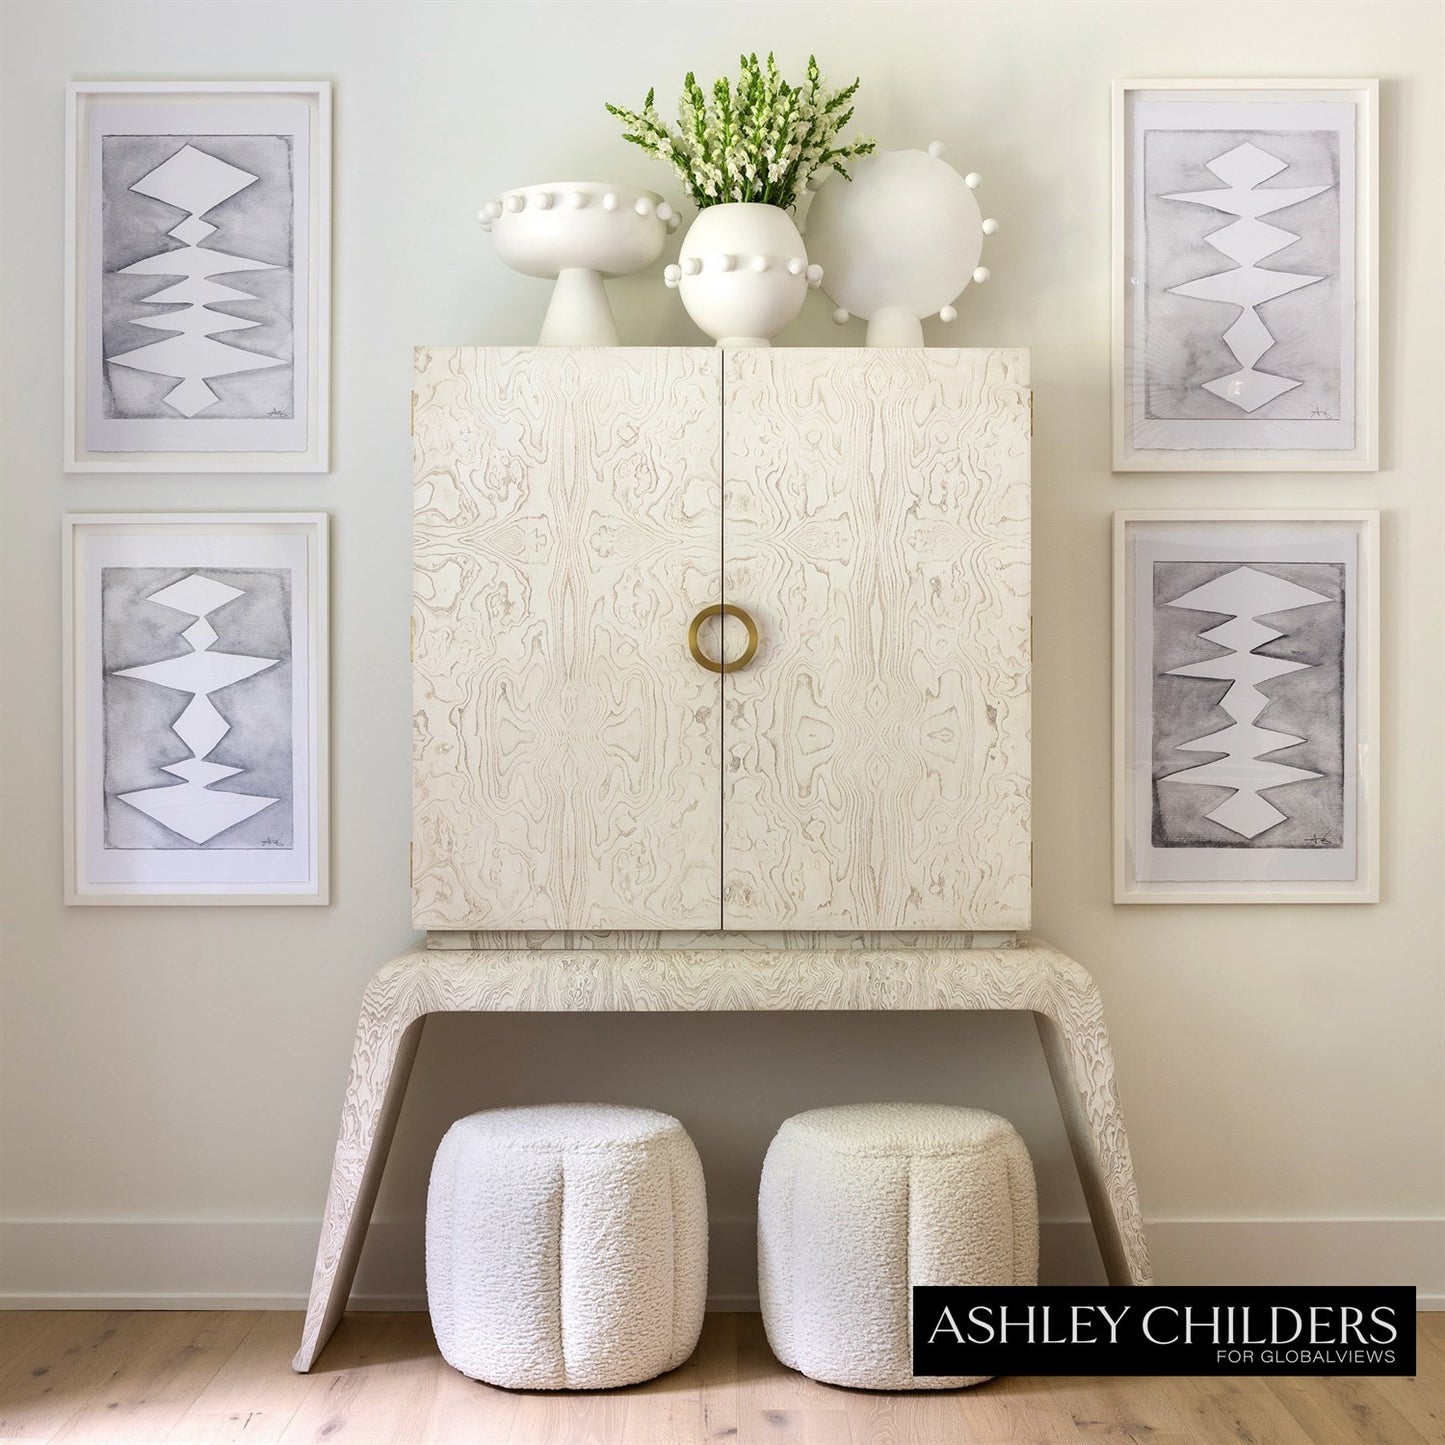 Spheres Collection Vessel - Ivory